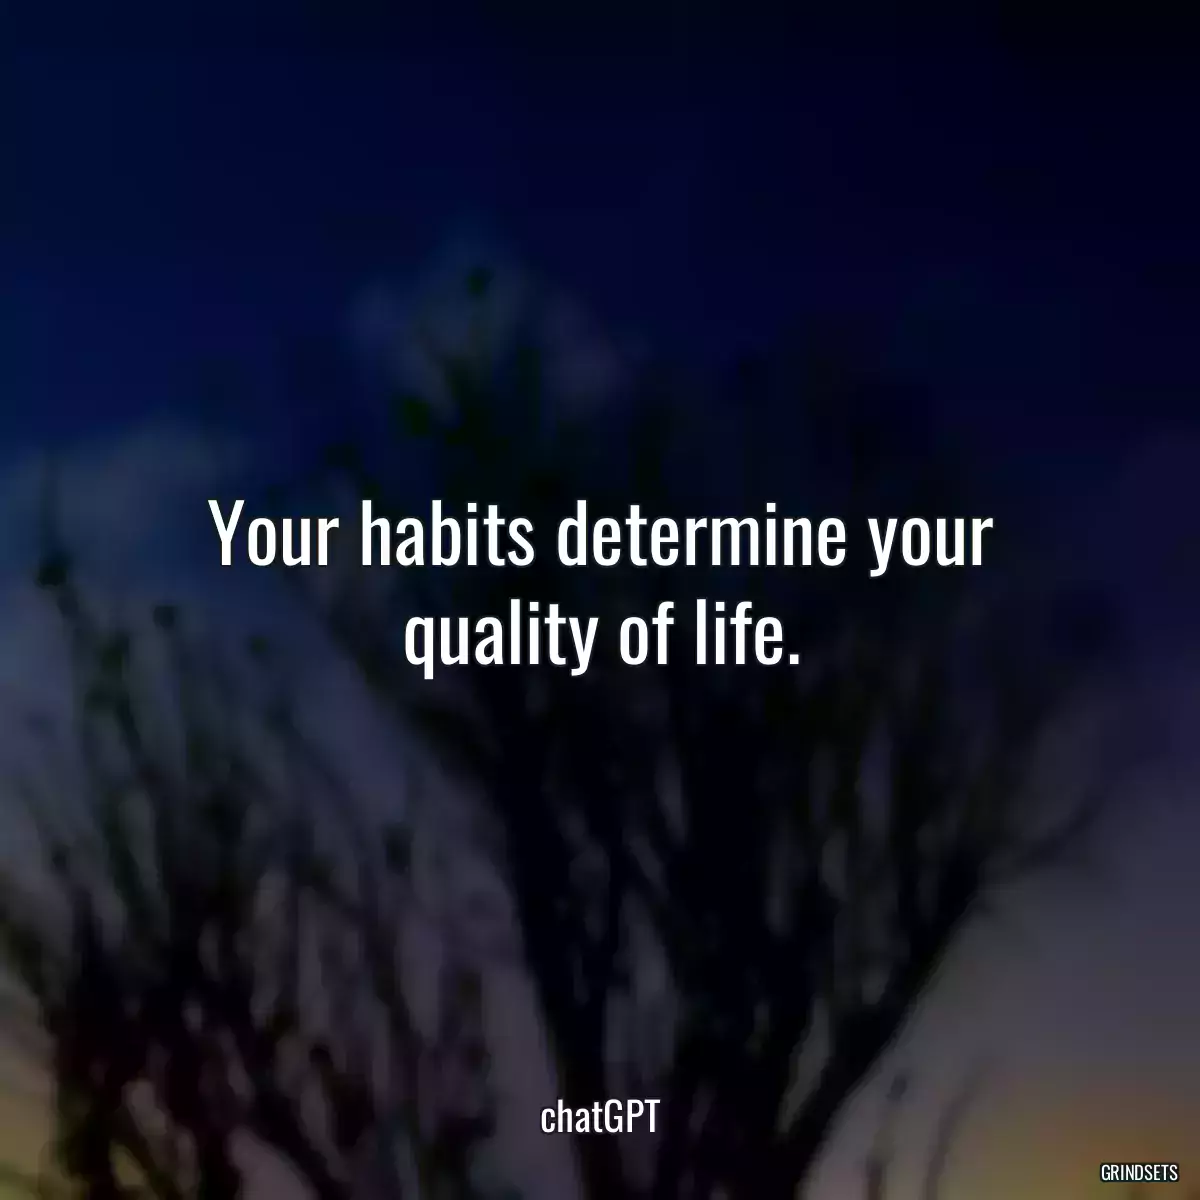 Your habits determine your quality of life.